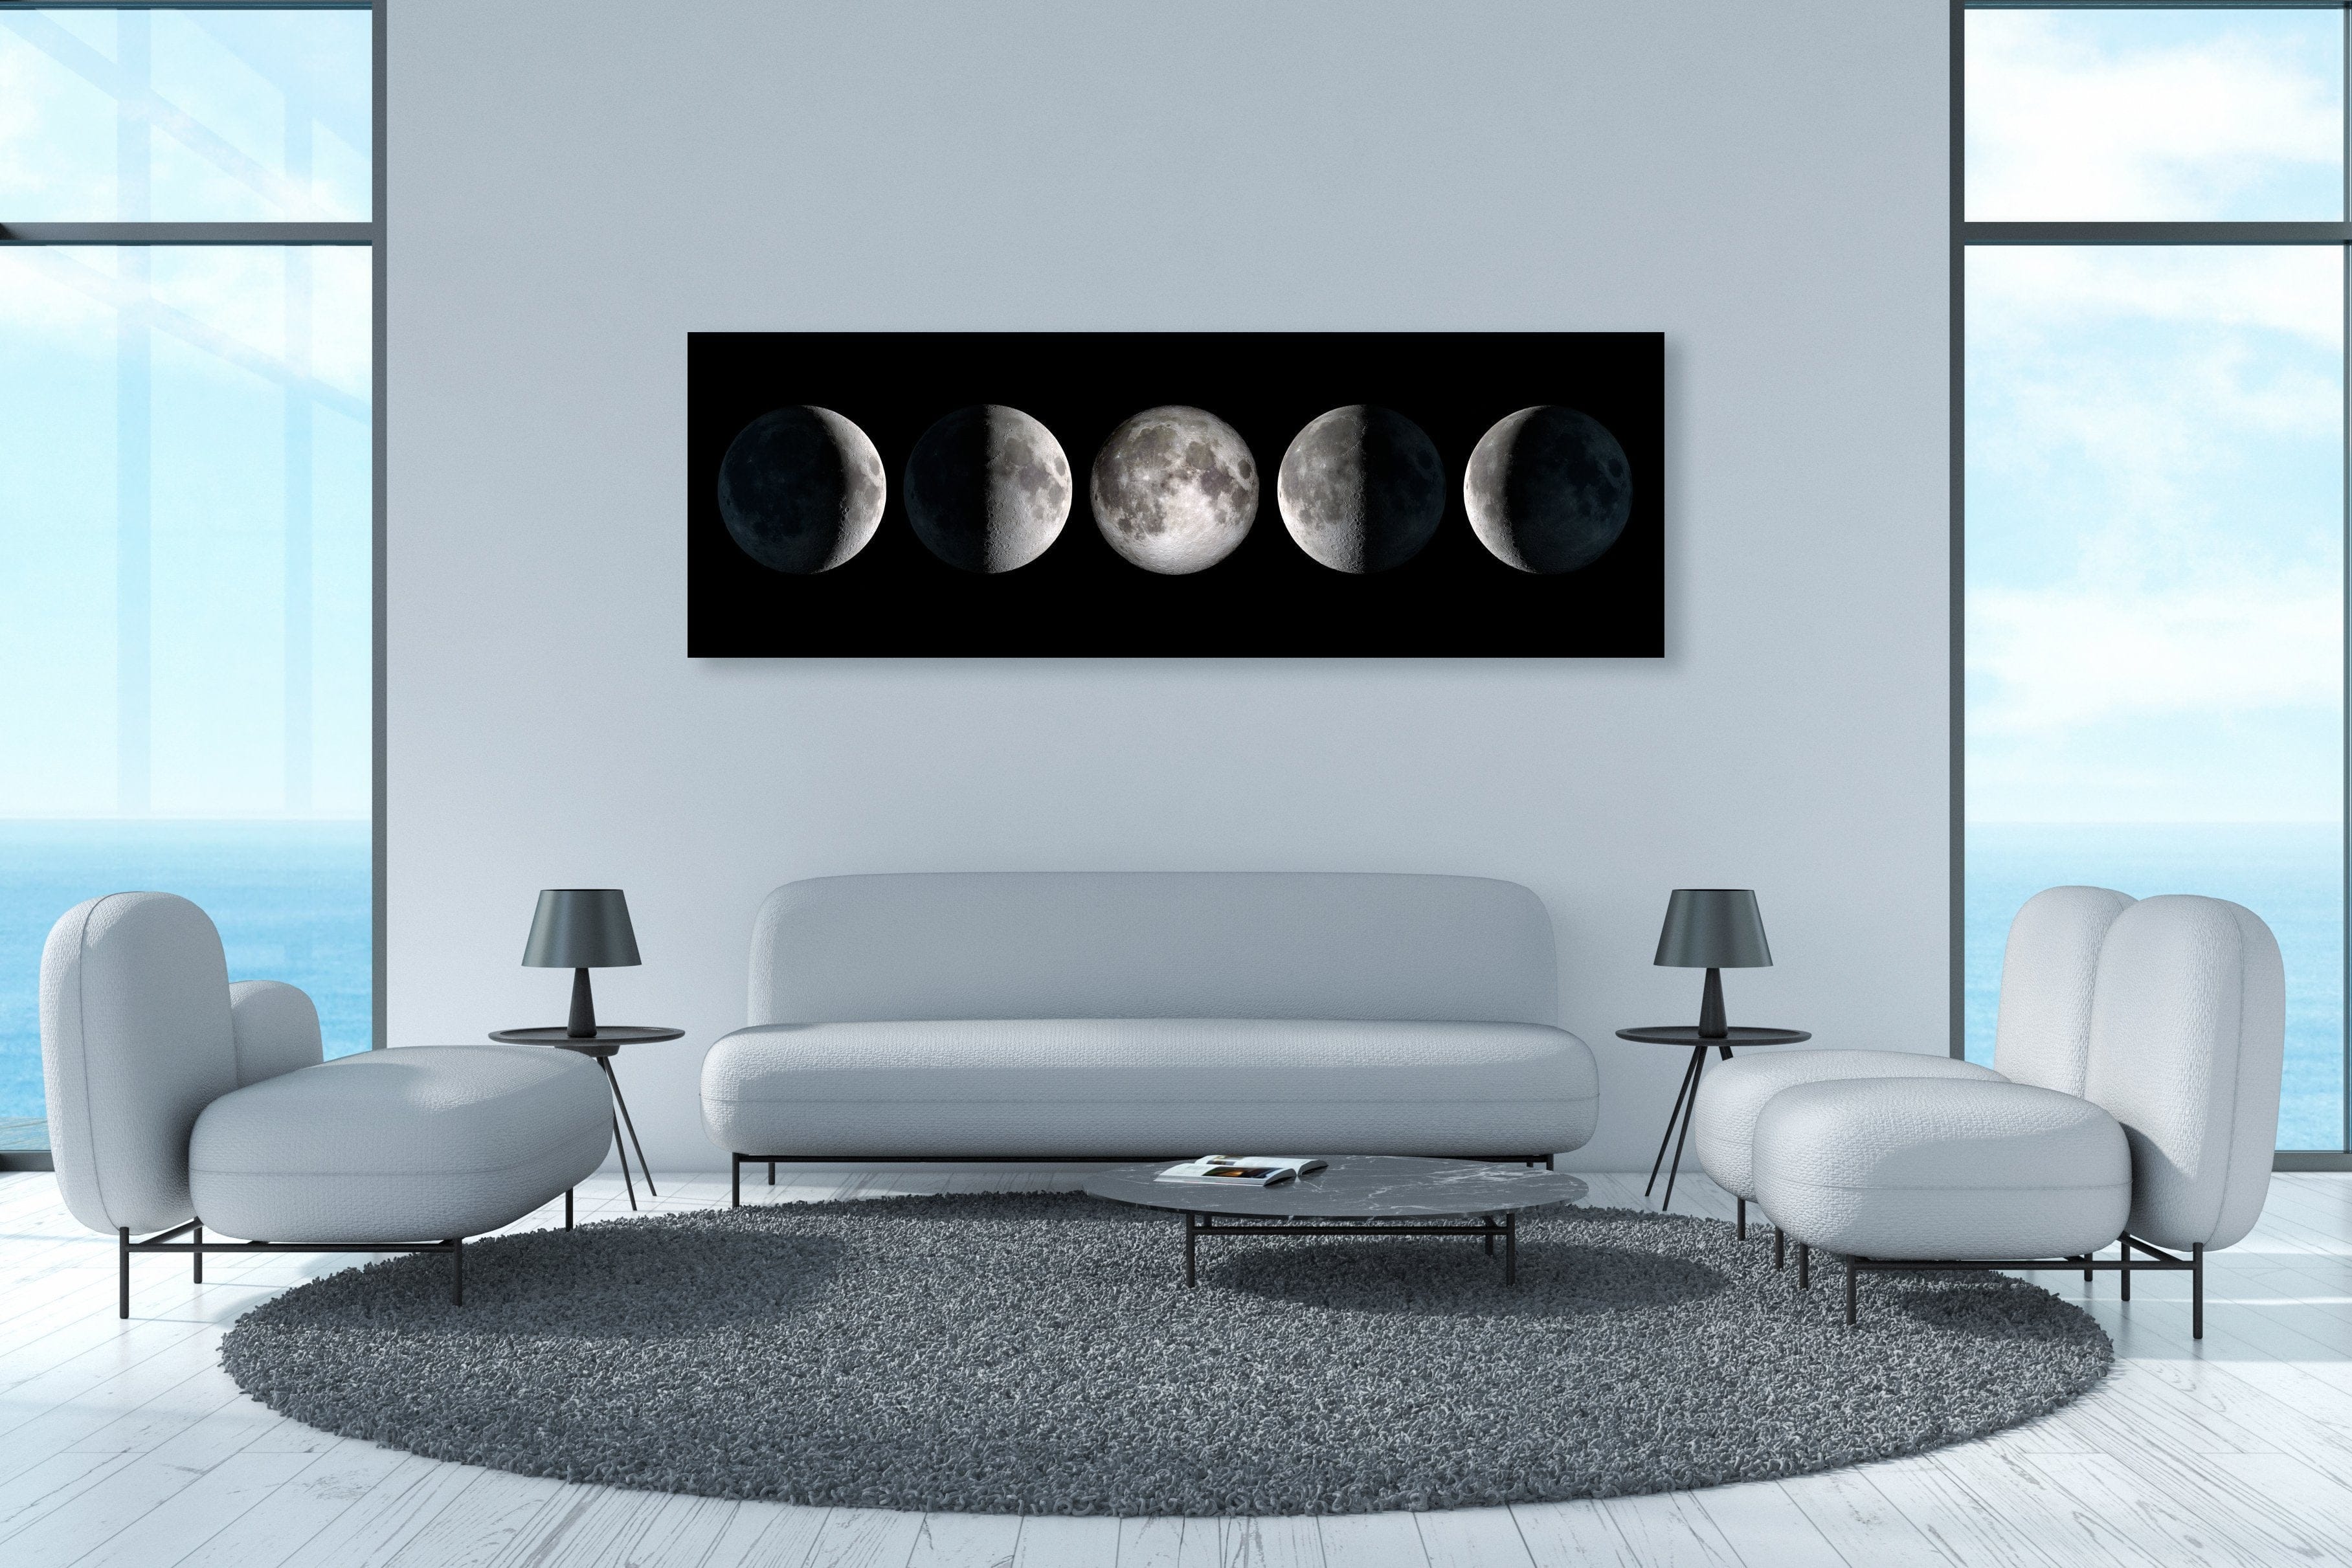 Moon Phase Sequence For sale as Framed Prints, Photos, Wall Art